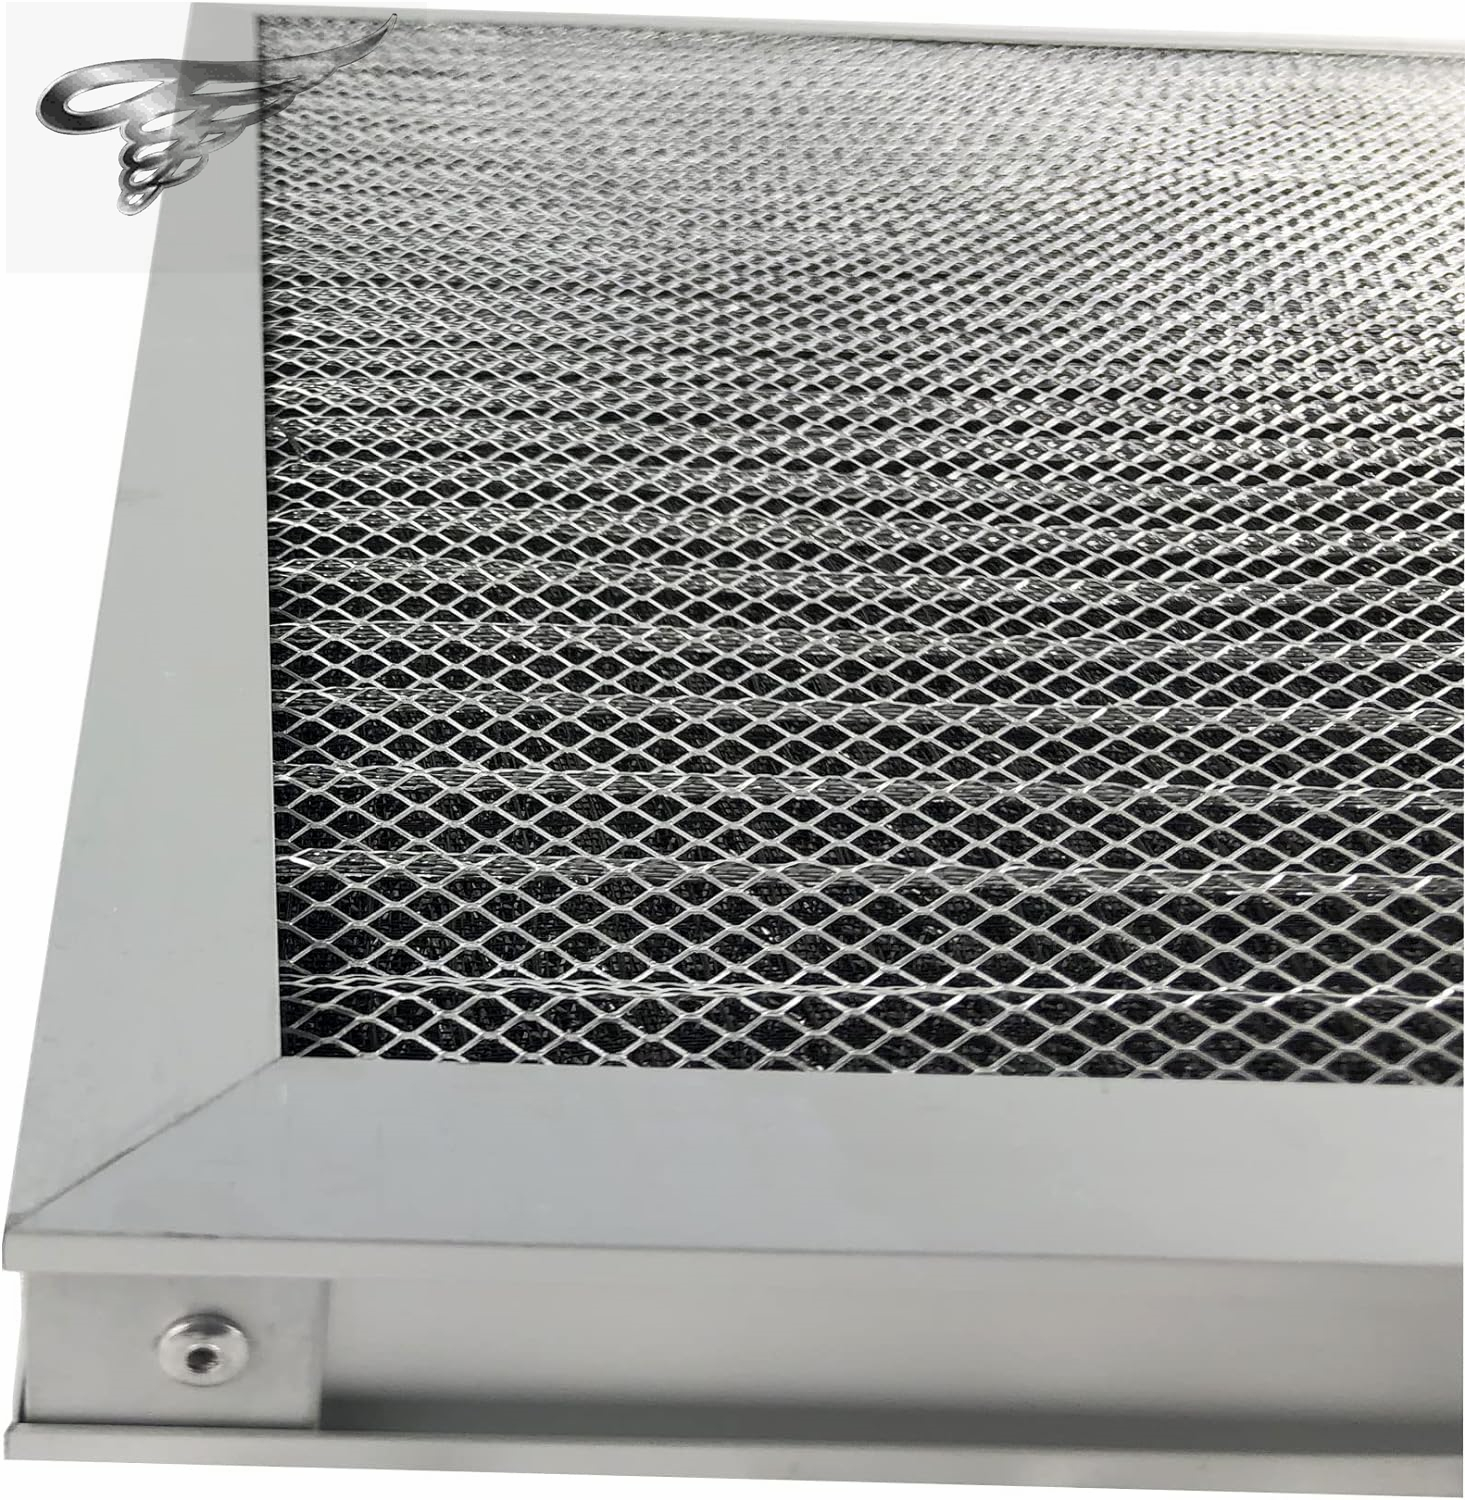 Washable Furnace Aluminum Filters: A Sustainable Solution for Air Filtration